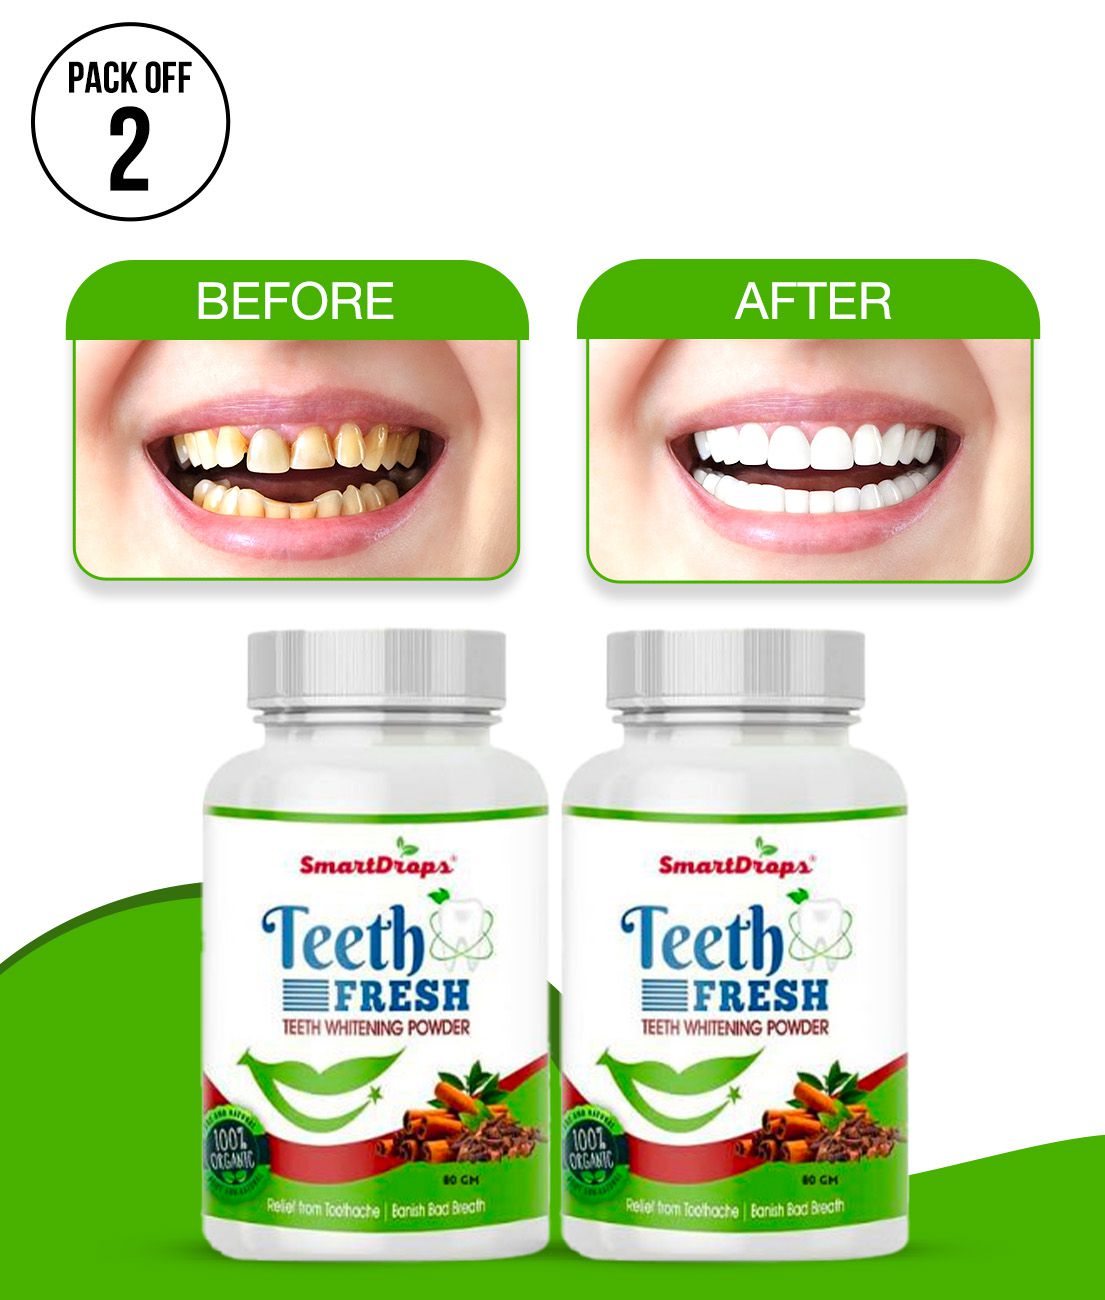     			Smartdrops Activated Charcoal Teeth Powder For Teeth Whitening Powder 80gm Pack of 2